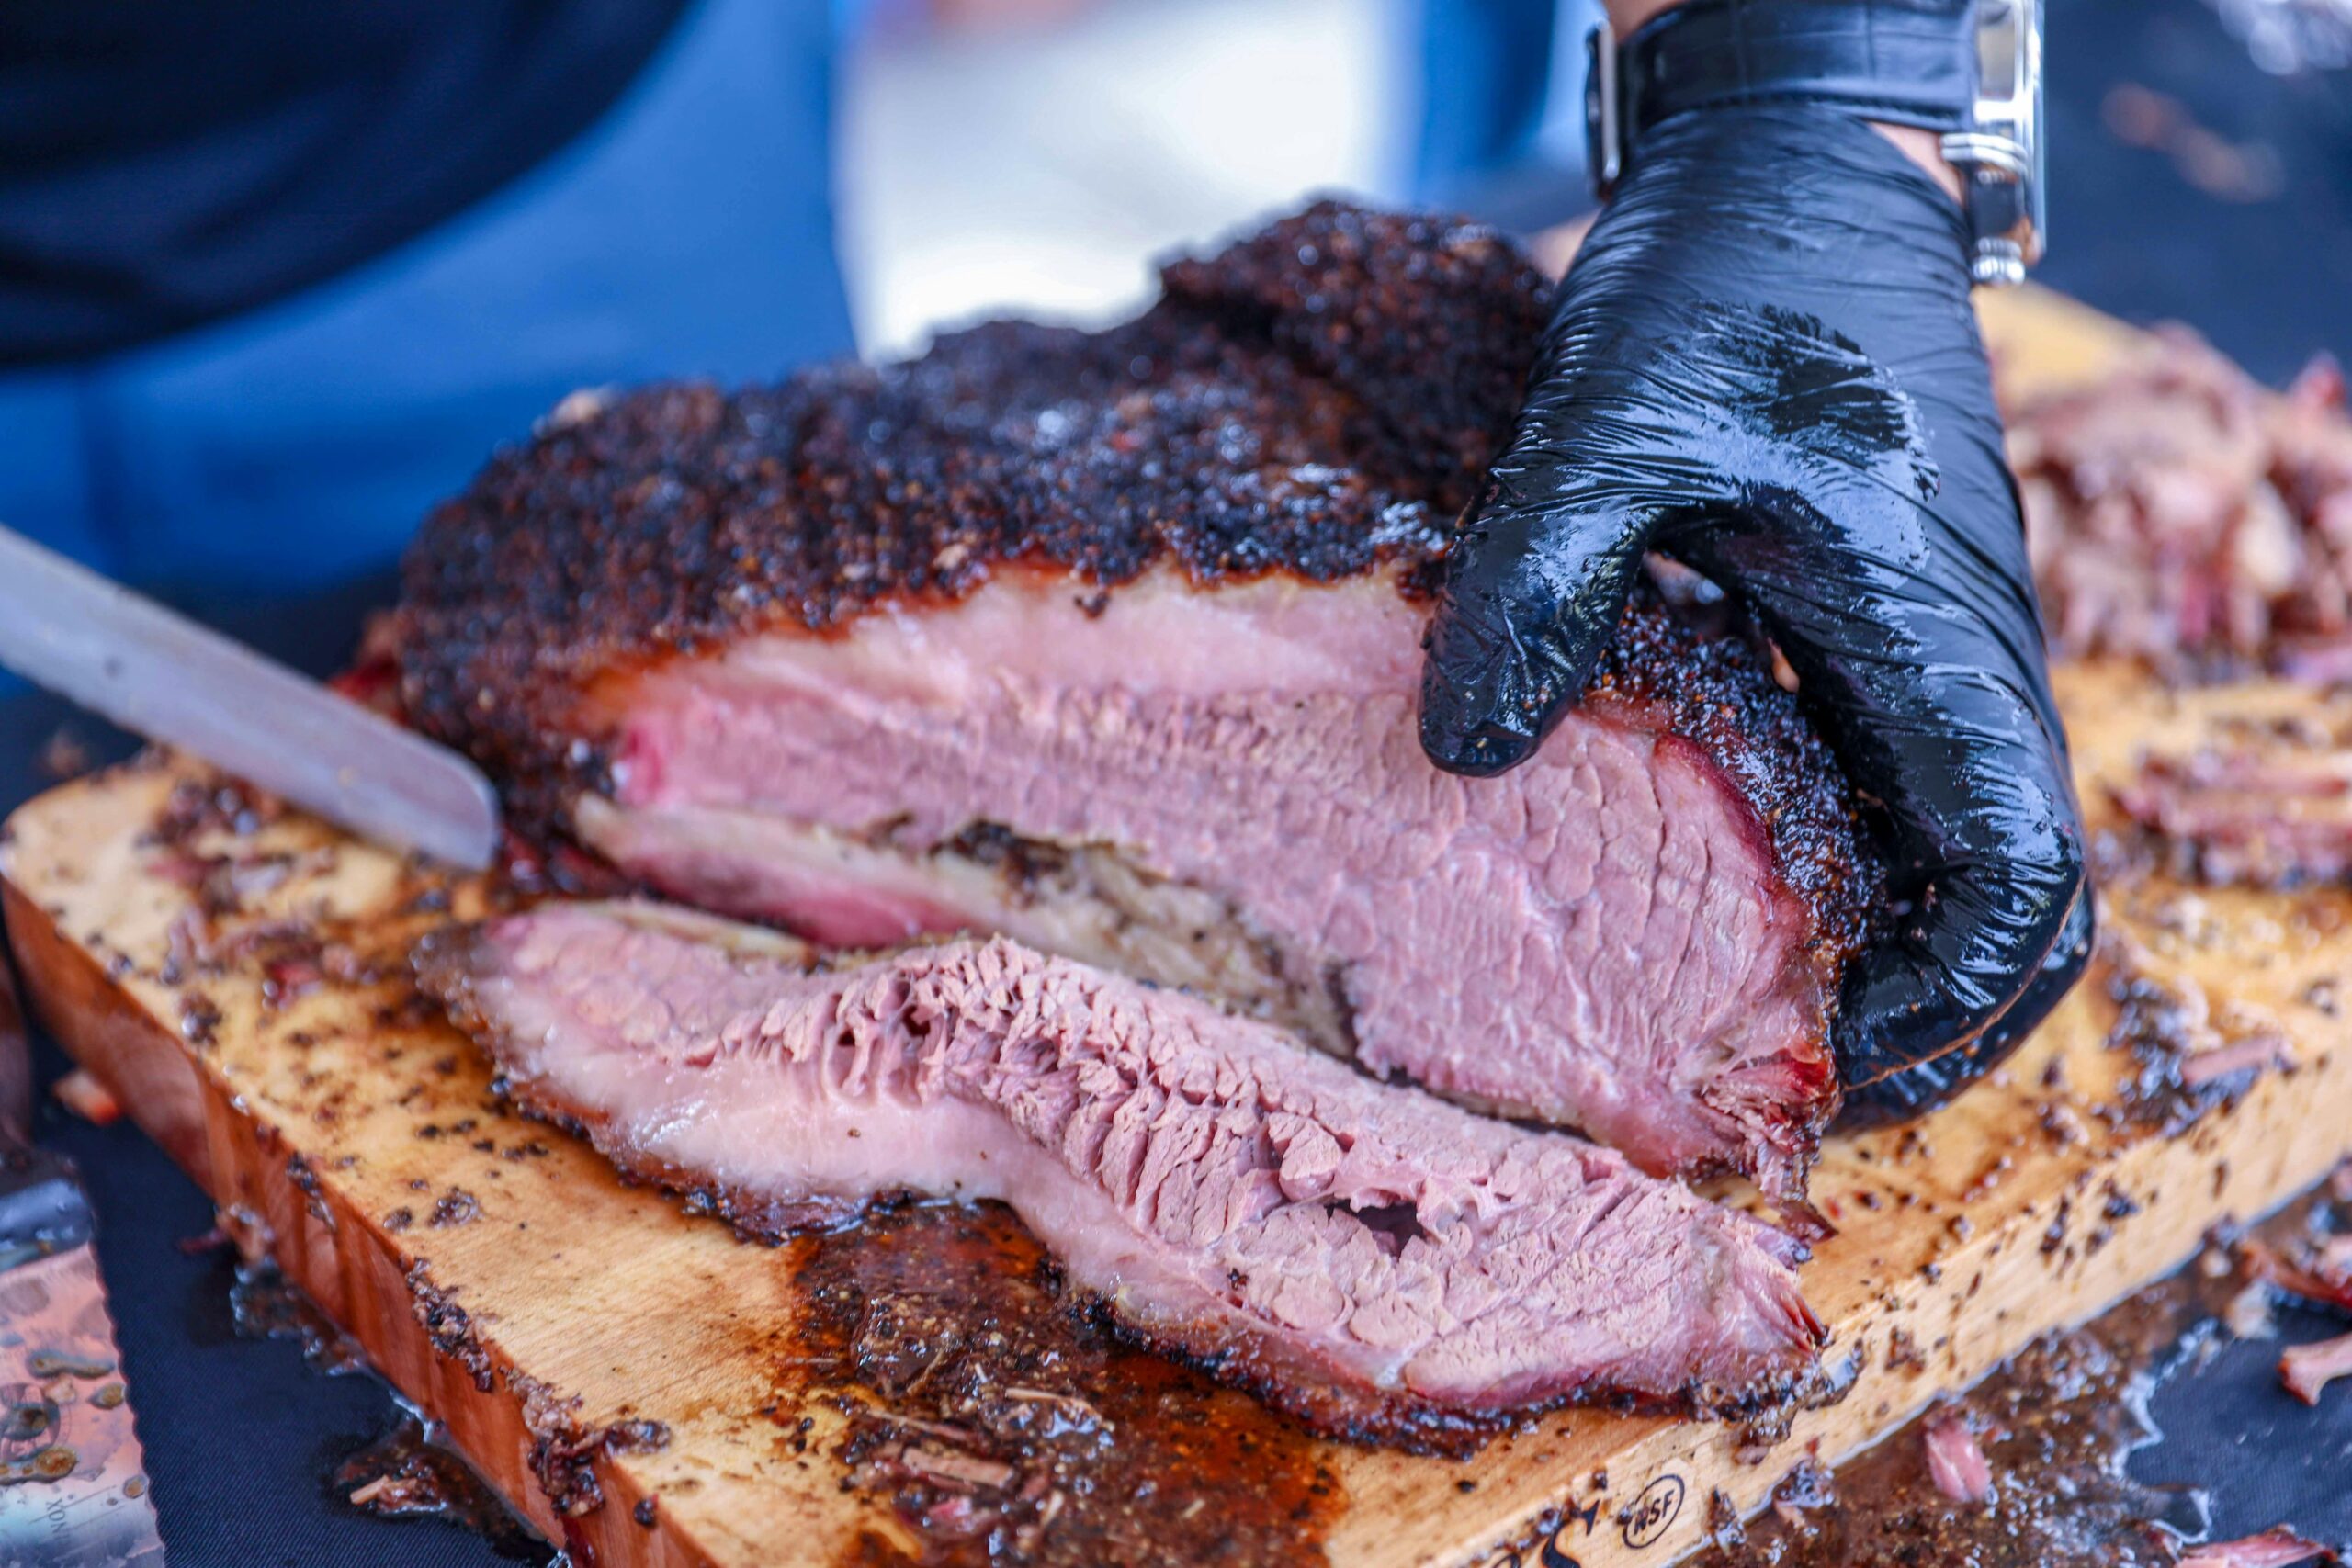 Can you bake a BBQ brisket?